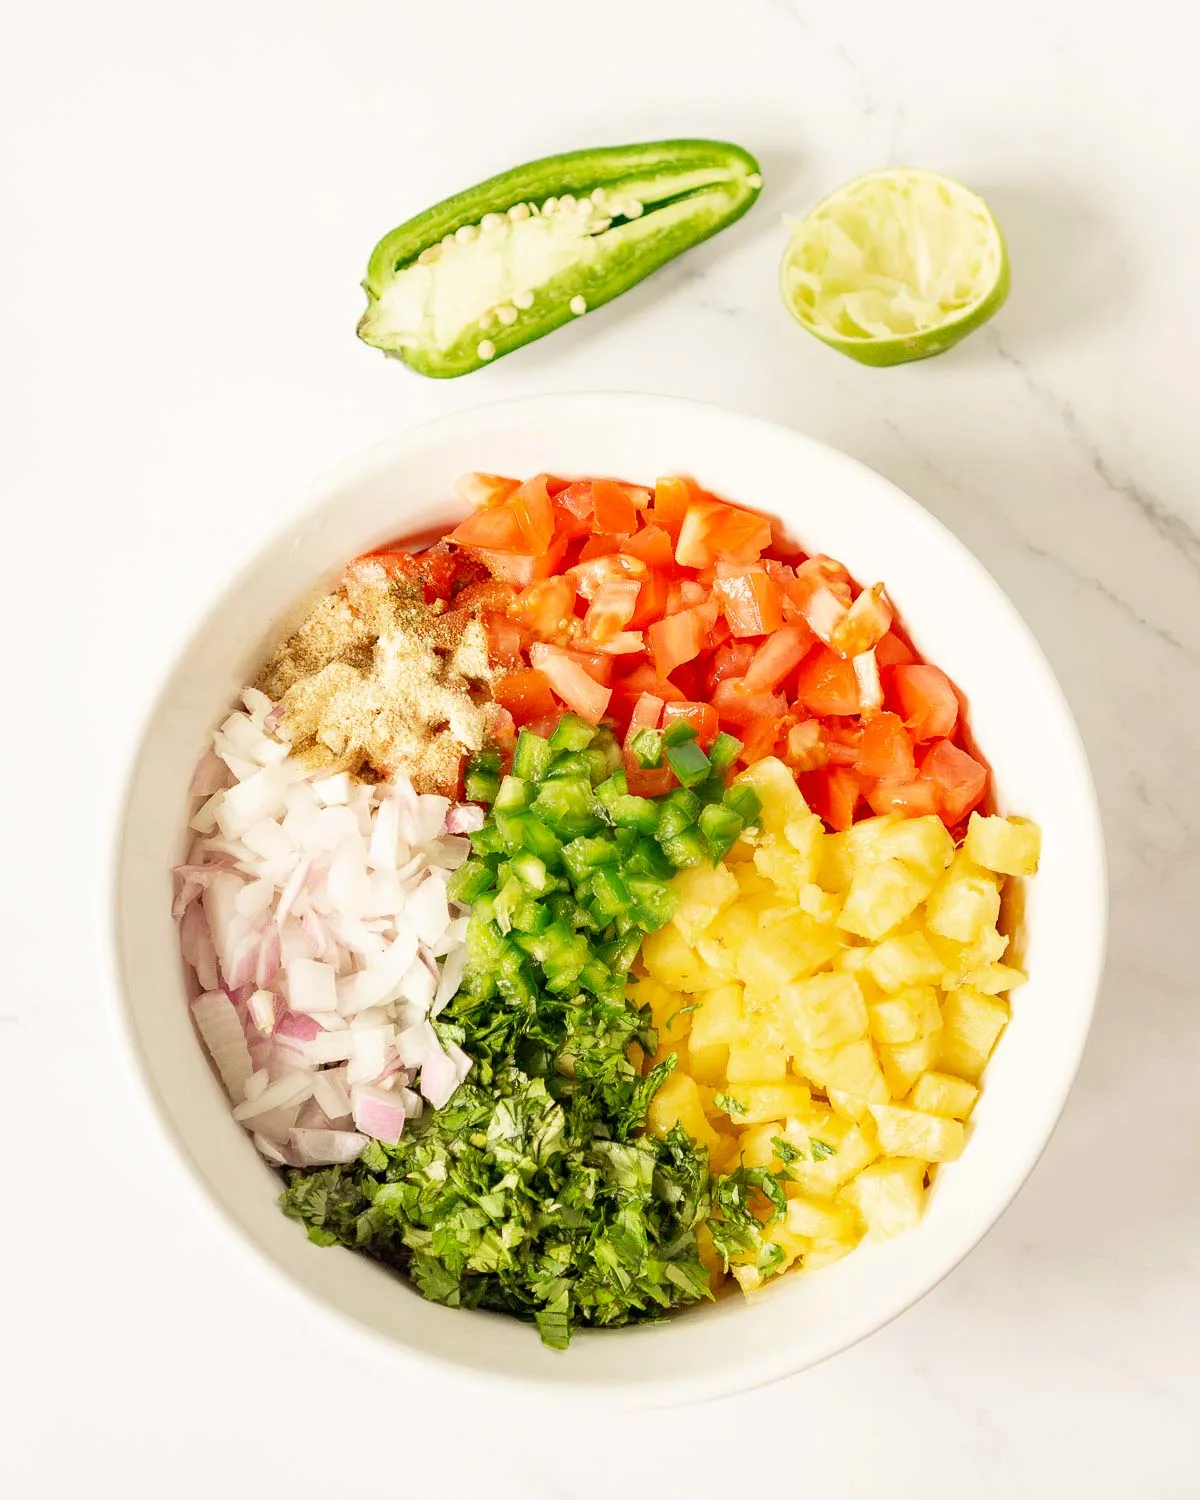 Bowl with diced ingredients for pineapple pico de gallo